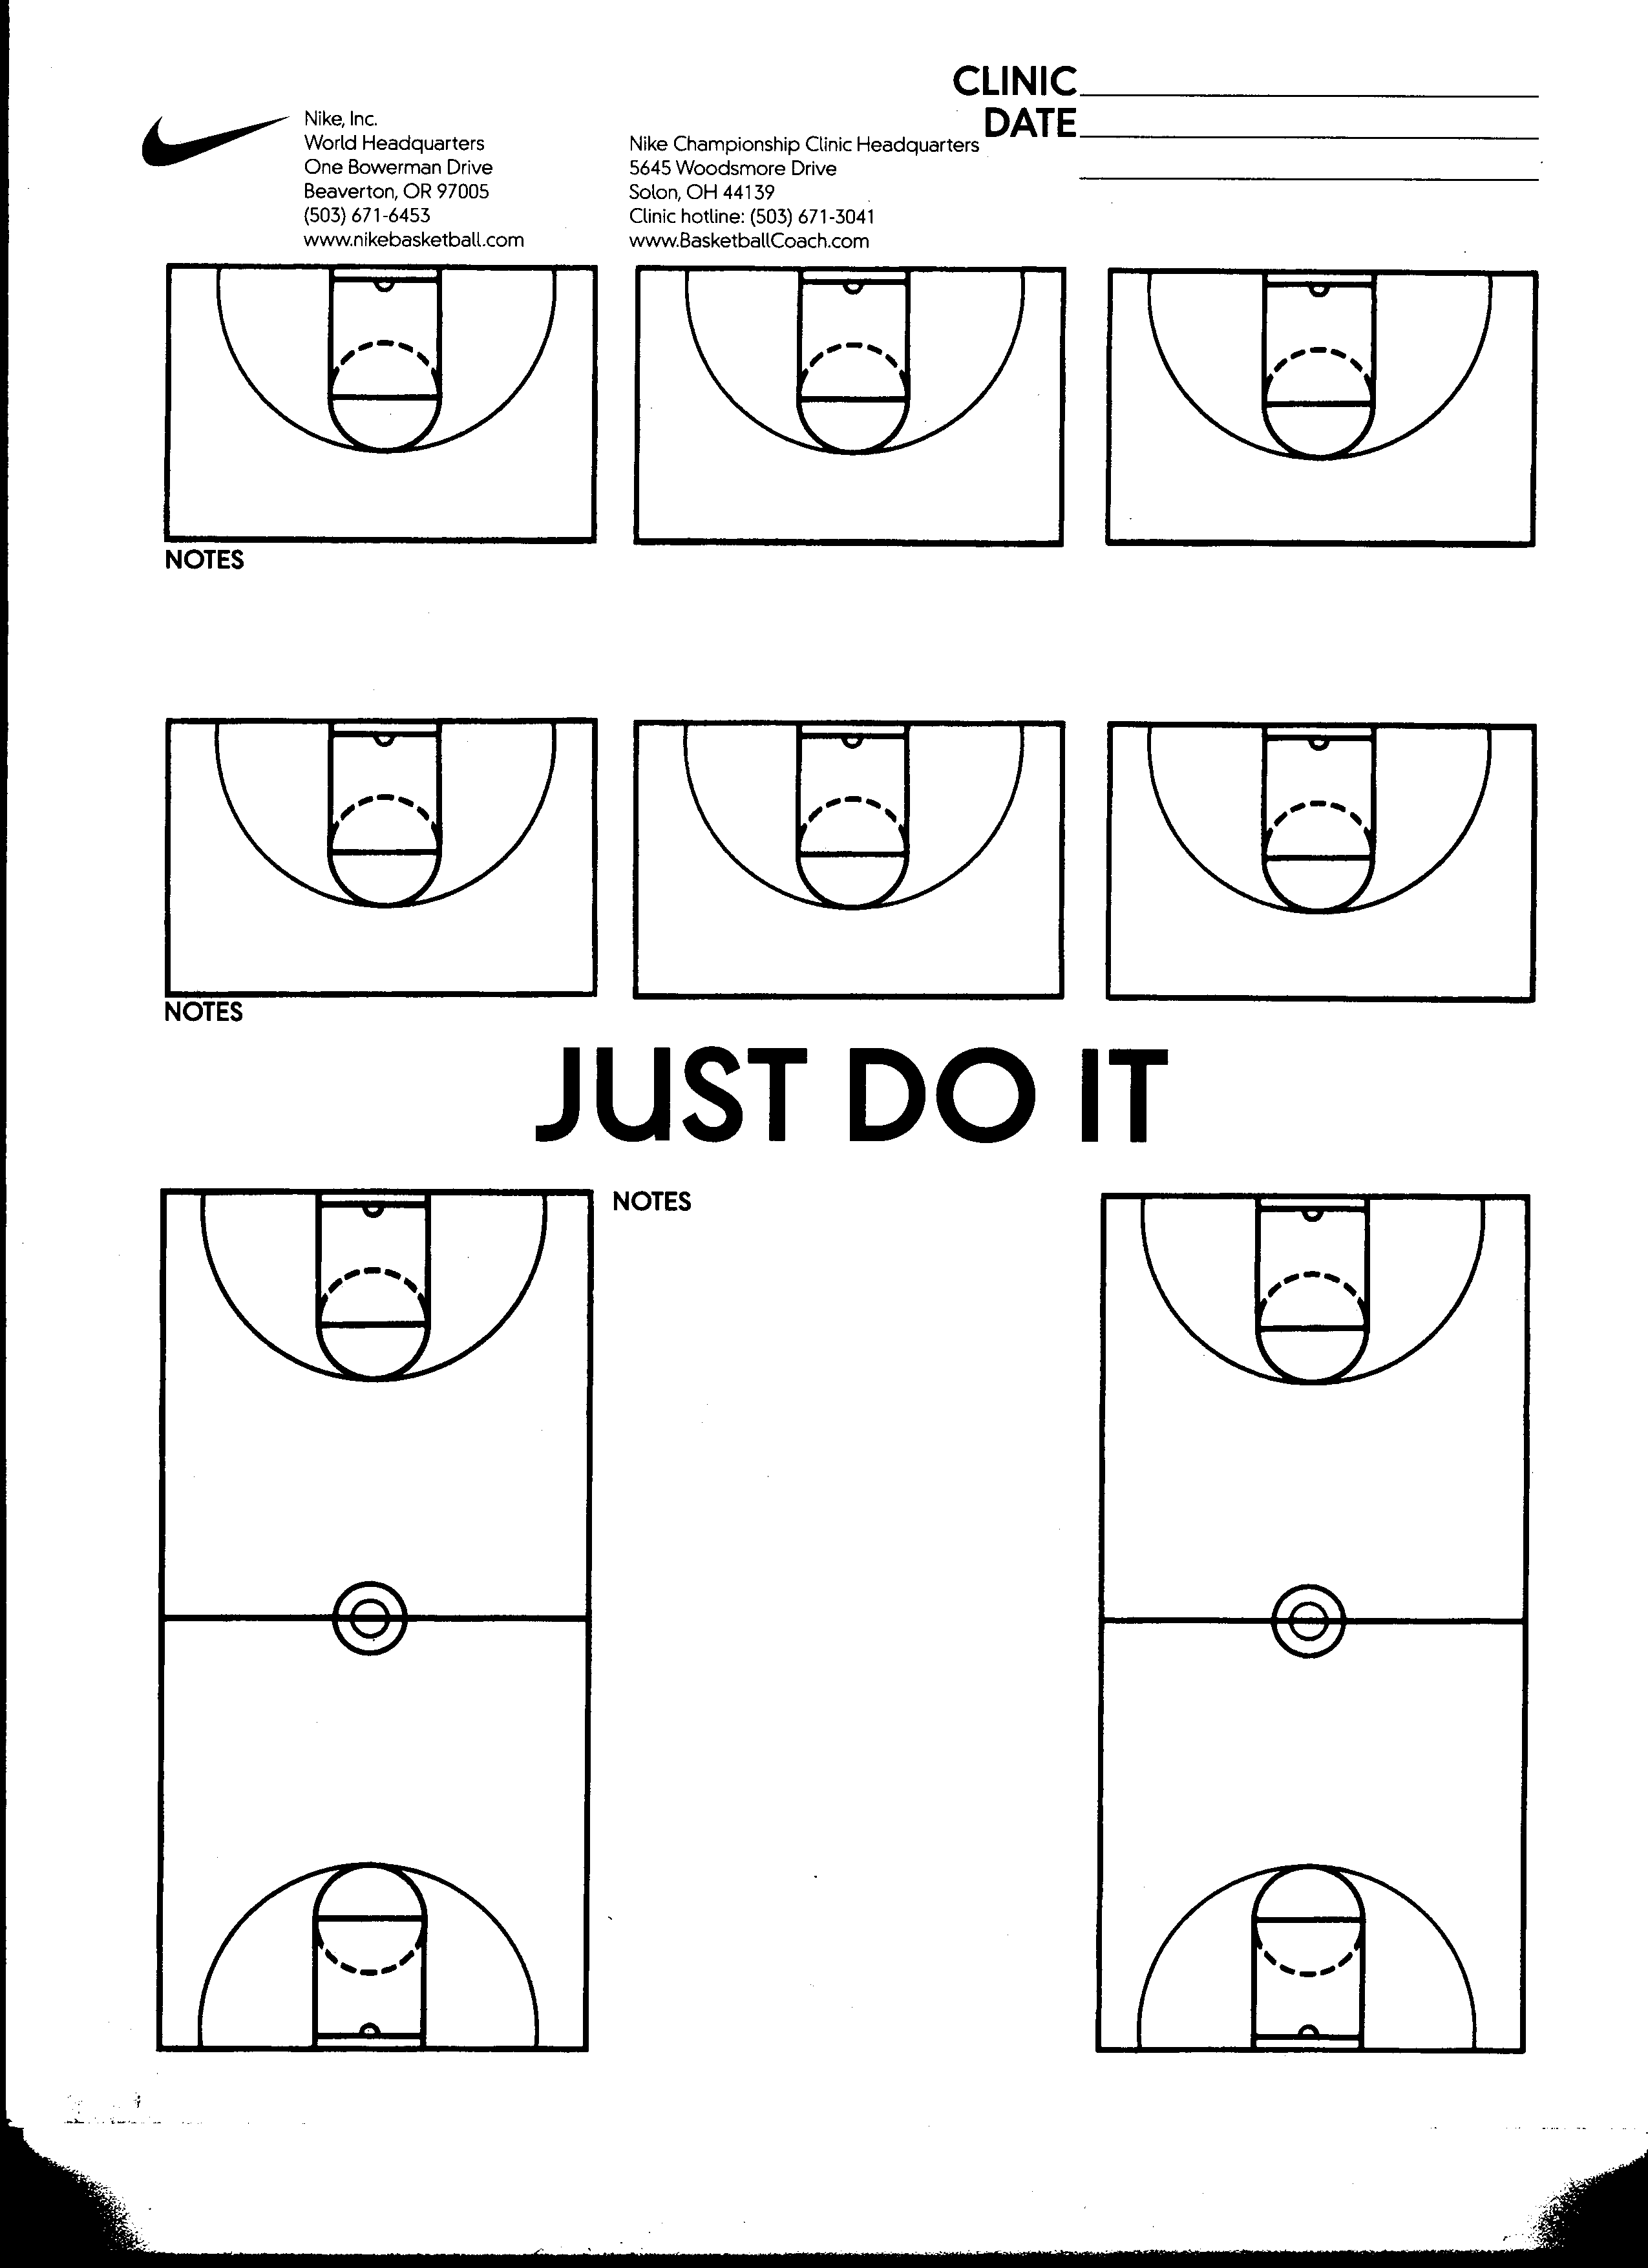 Basketball Practice Plan - A Step by Step Template for Coaches